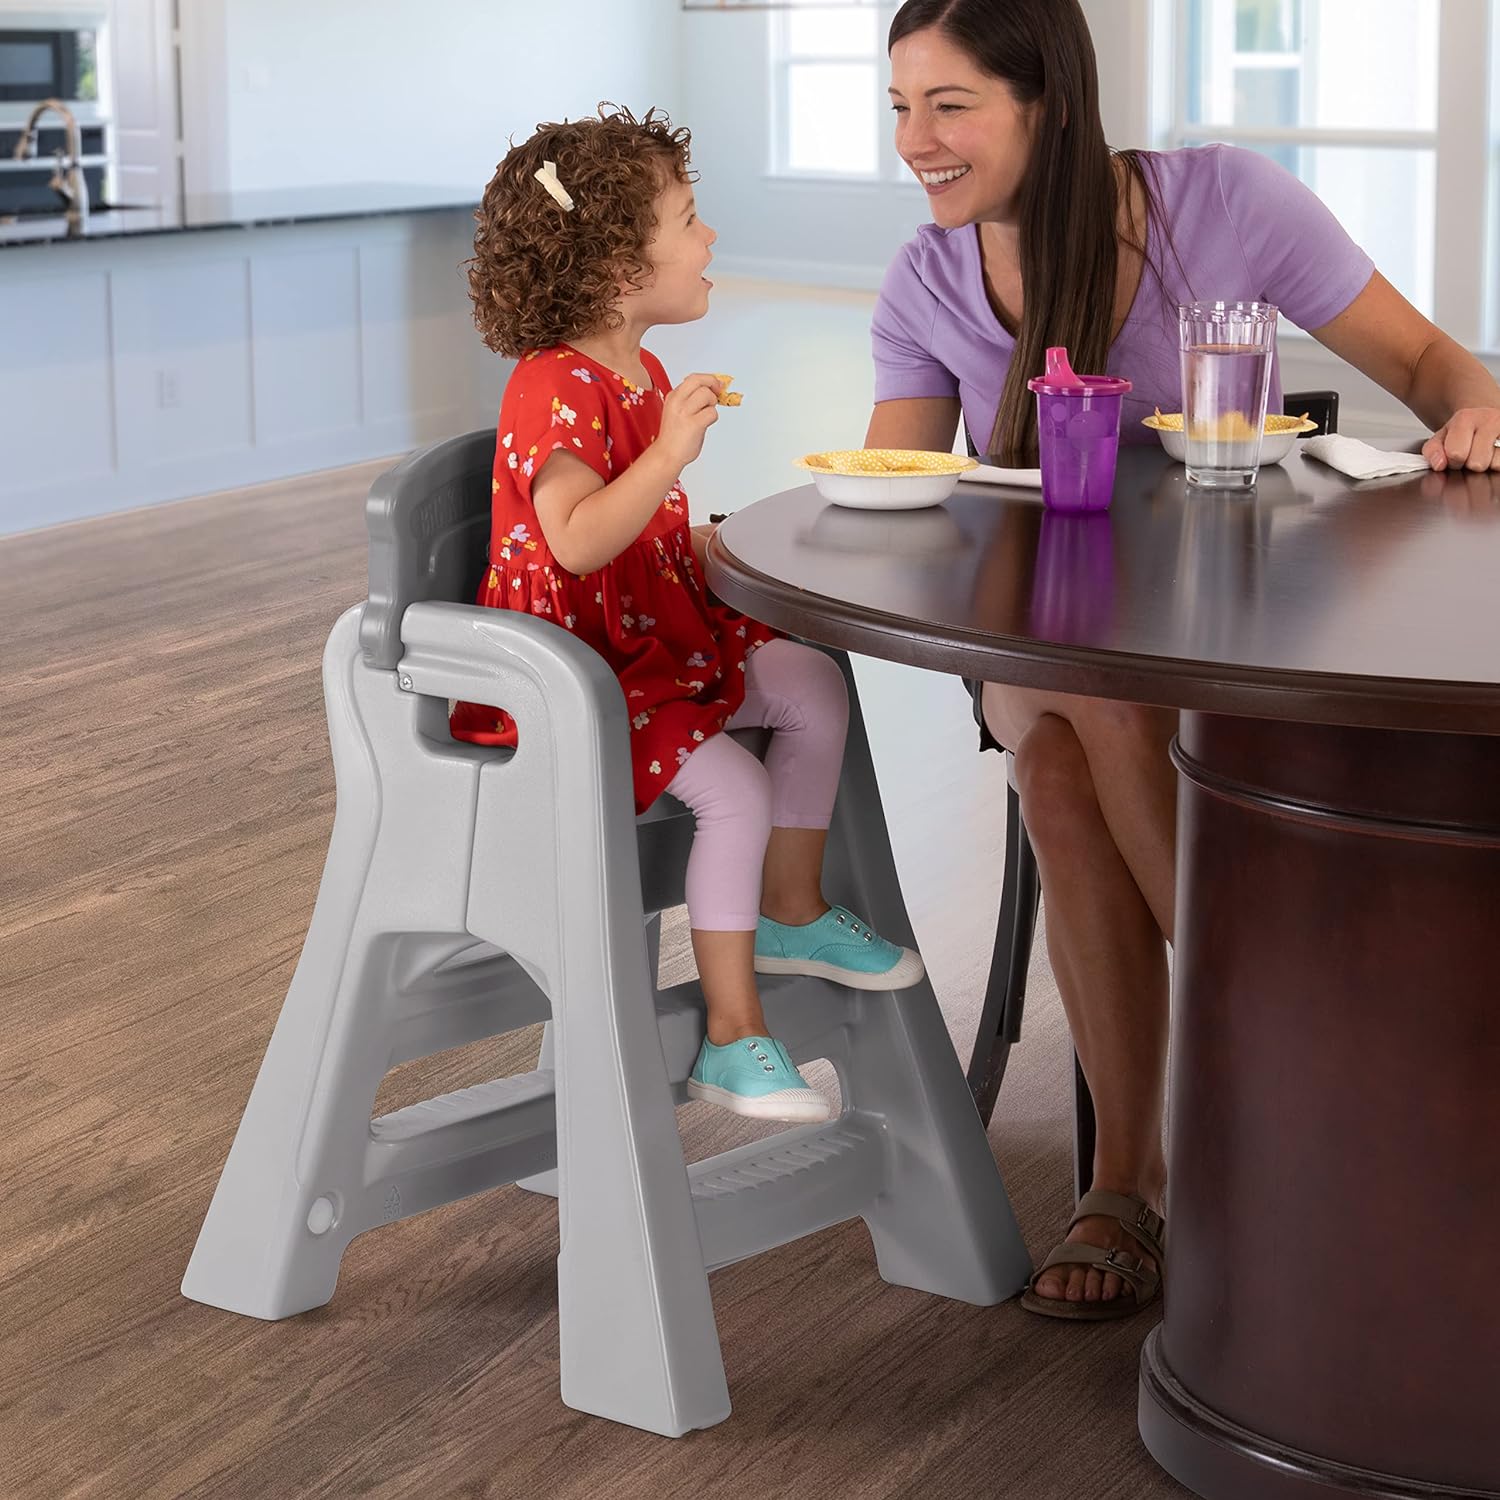 https://bigbigmart.com/wp-content/uploads/2023/10/Simplay3-Big-Kids-Booster-Seat-Lightweight-Toddler-Booster-Chair-for-Dining-Table-and-Kitchen-Toddler-Kitchen-Helper-Made-in-USA1.jpg